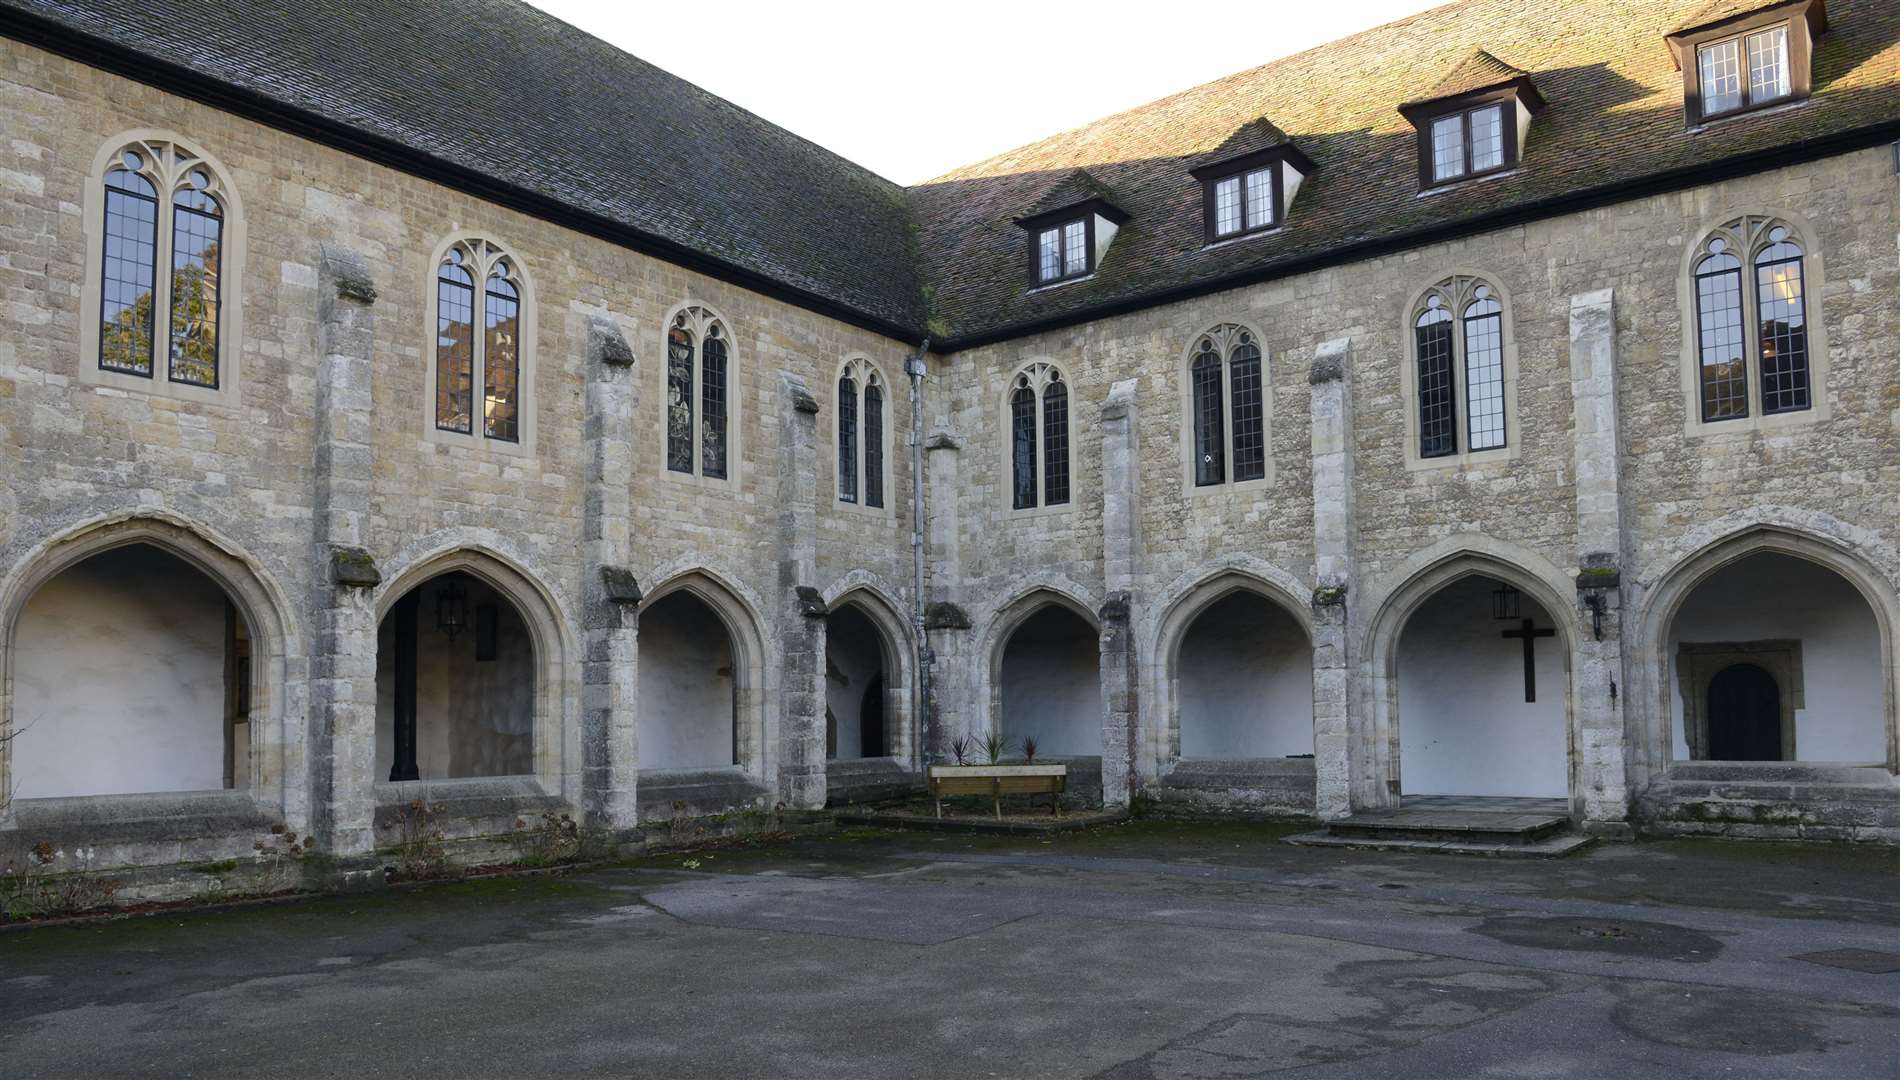 The Cloisters at Aylesford Priory